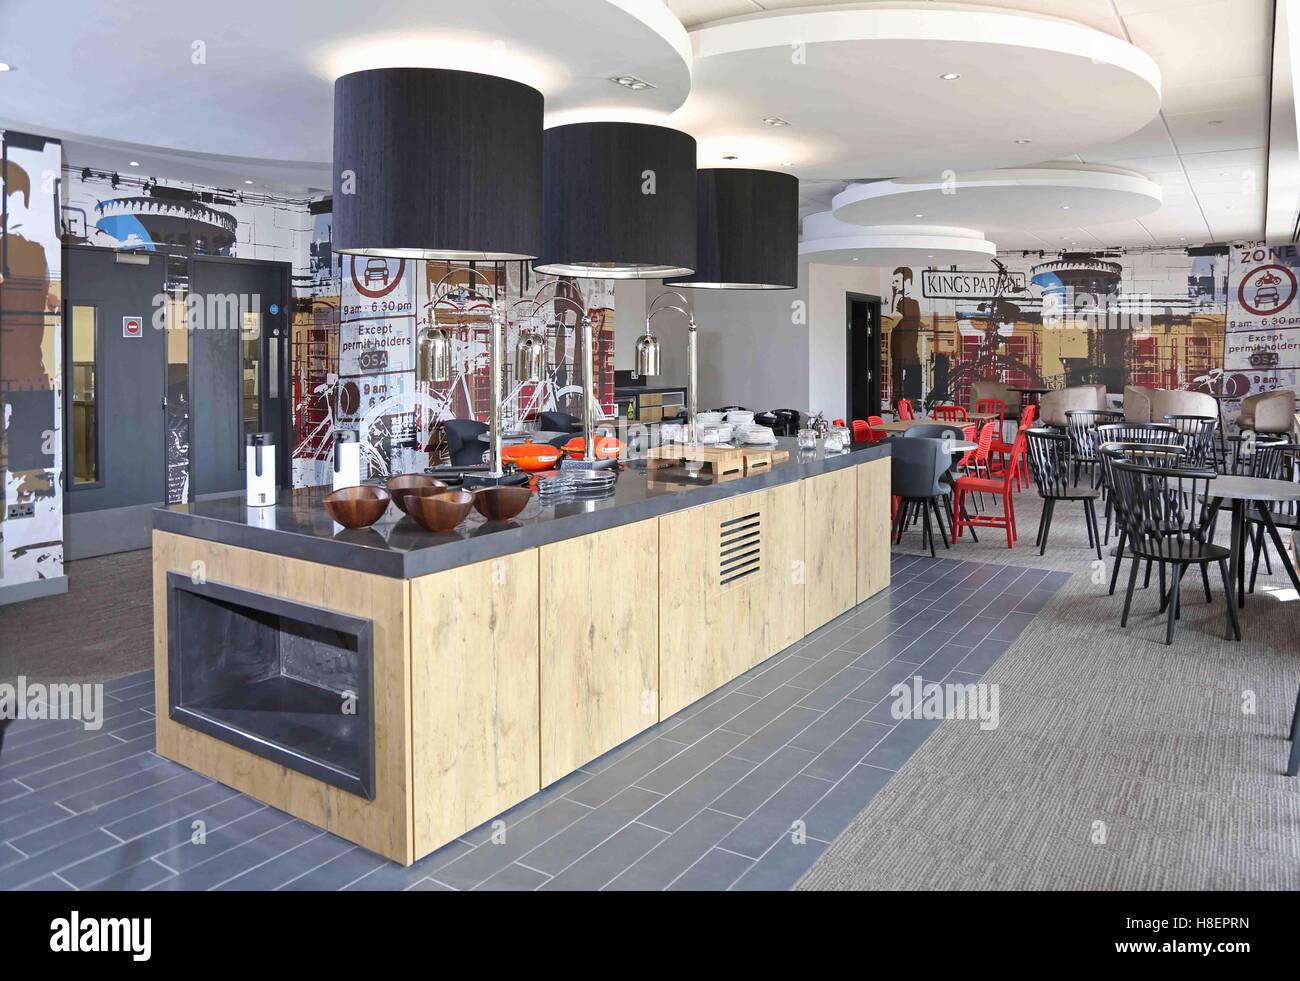 Breakfast self-service and seating area in the new Ibis Hotel in Cambridge, UK. Shows serving dishes and crockery prior to use. Stock Photo